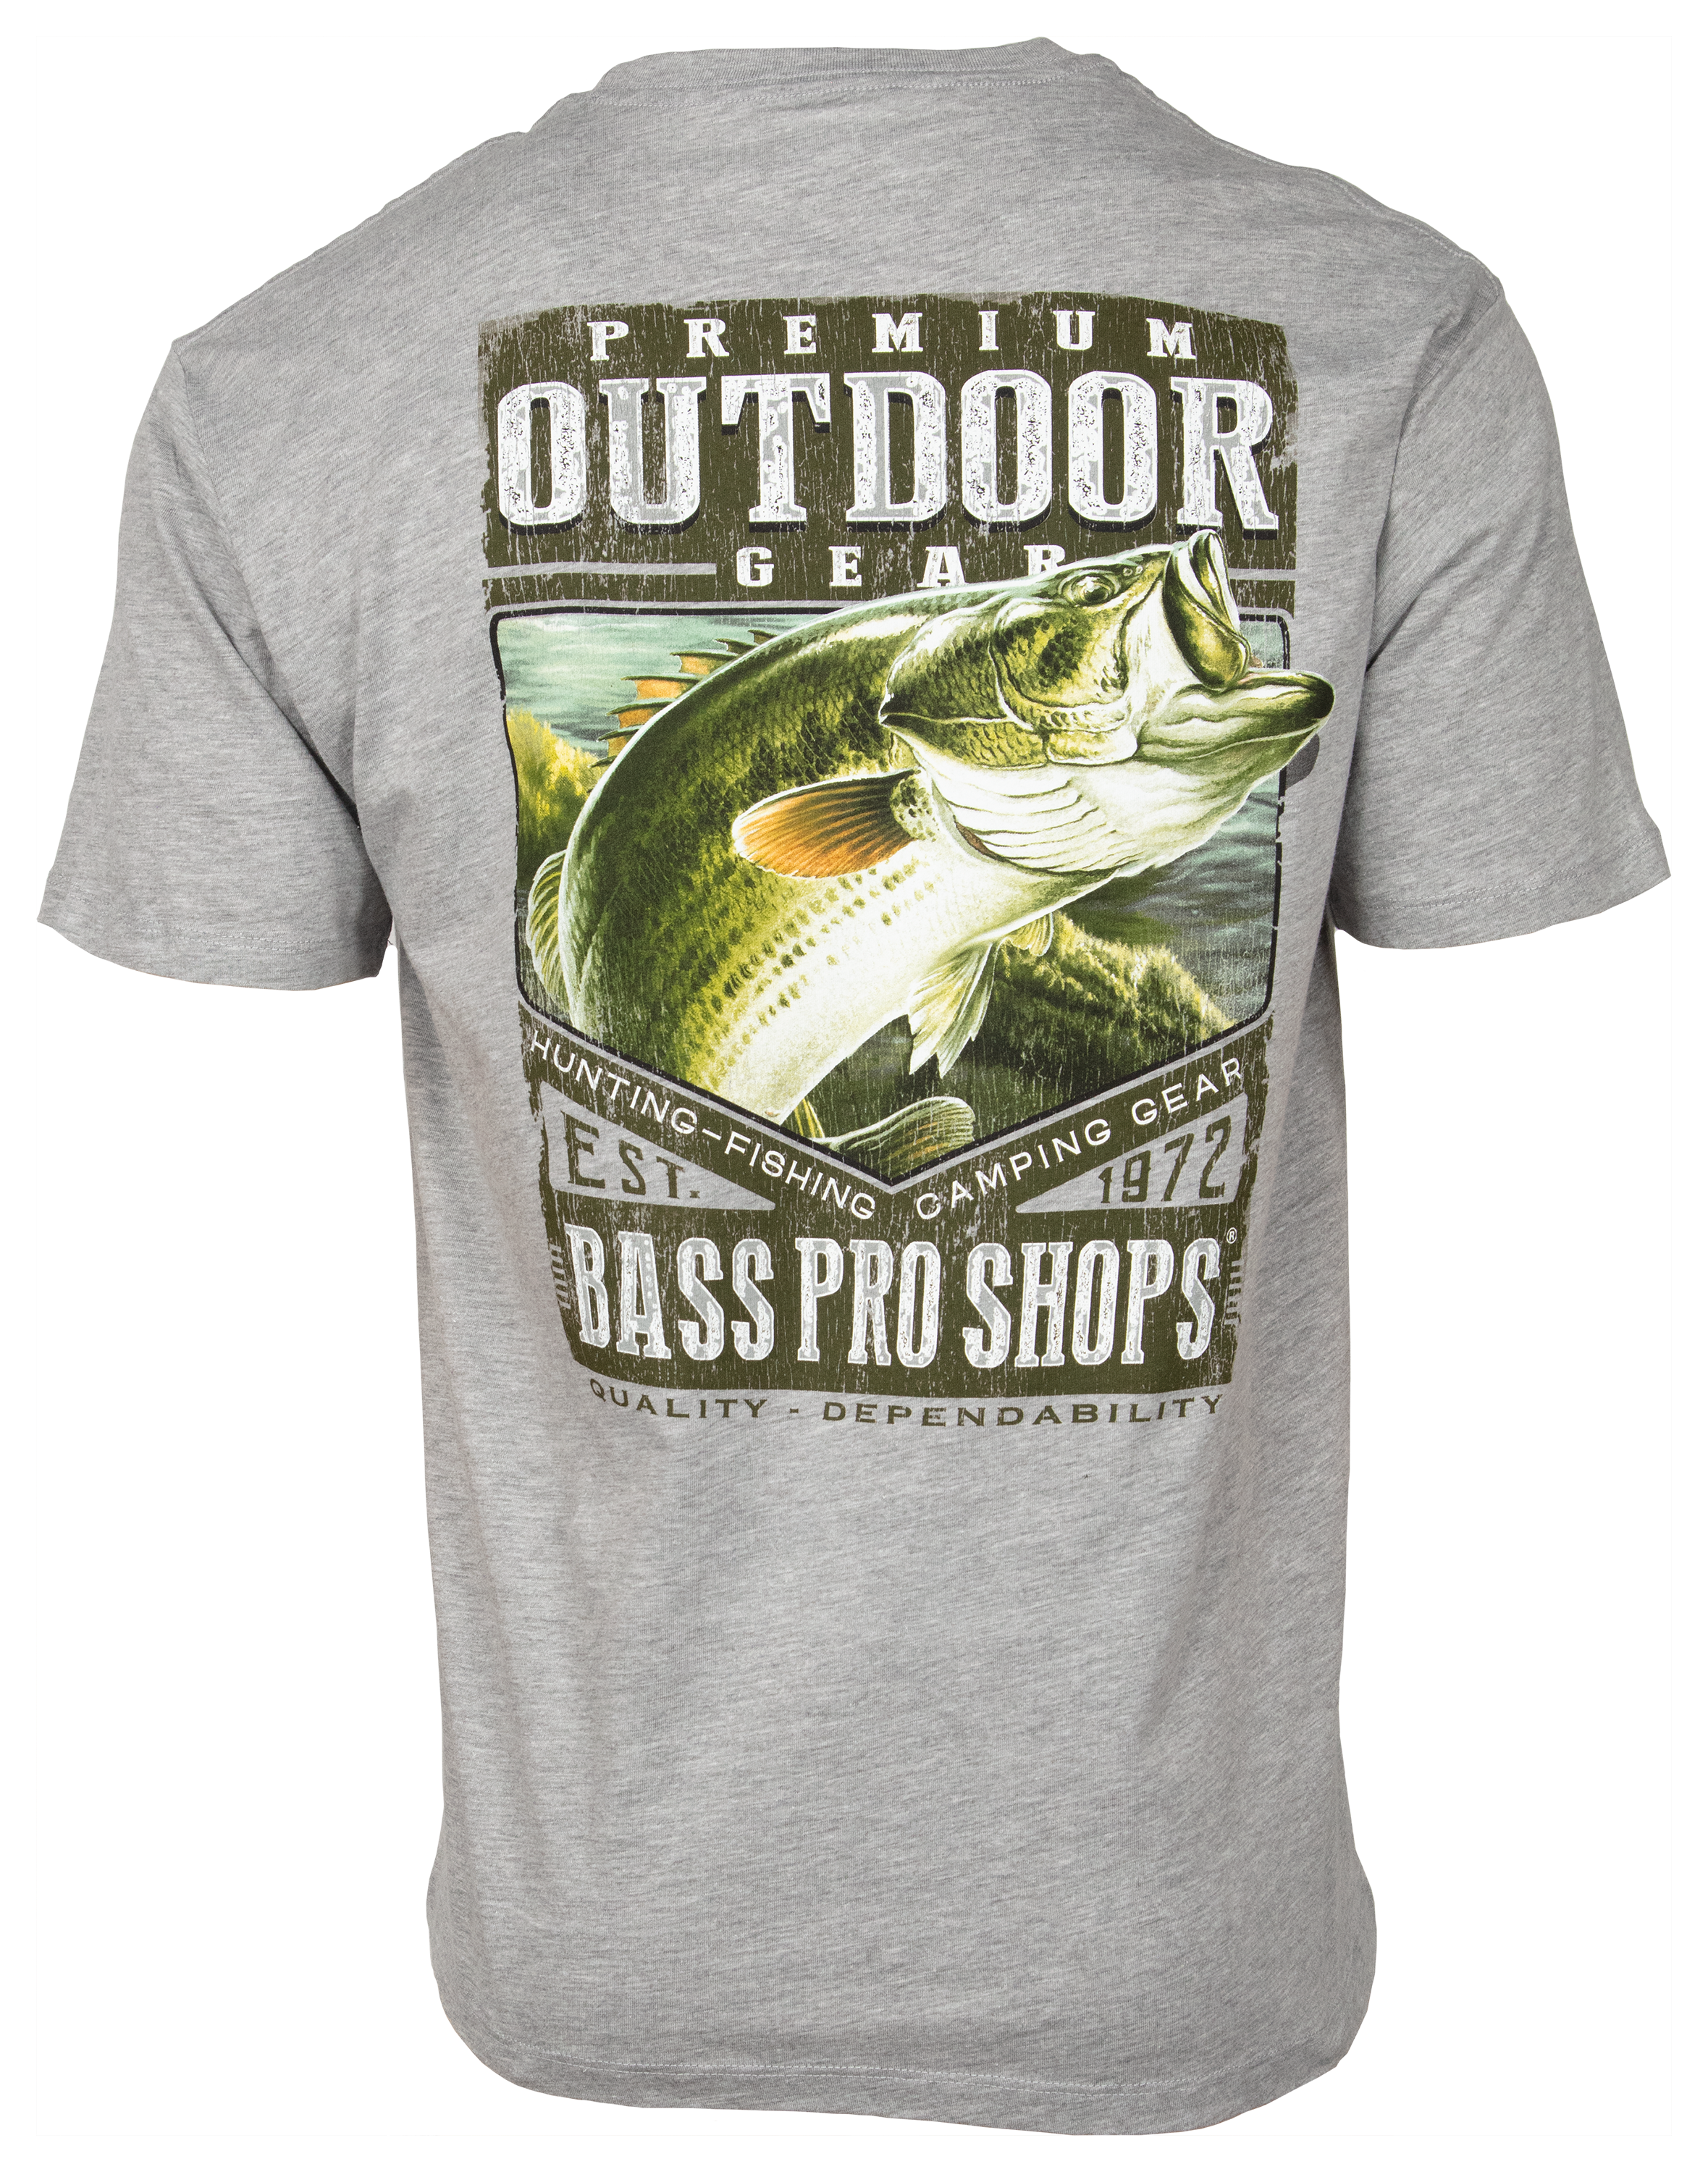 Bass Pro Shops Short Sleeve Fishing Shirts & Tops for sale